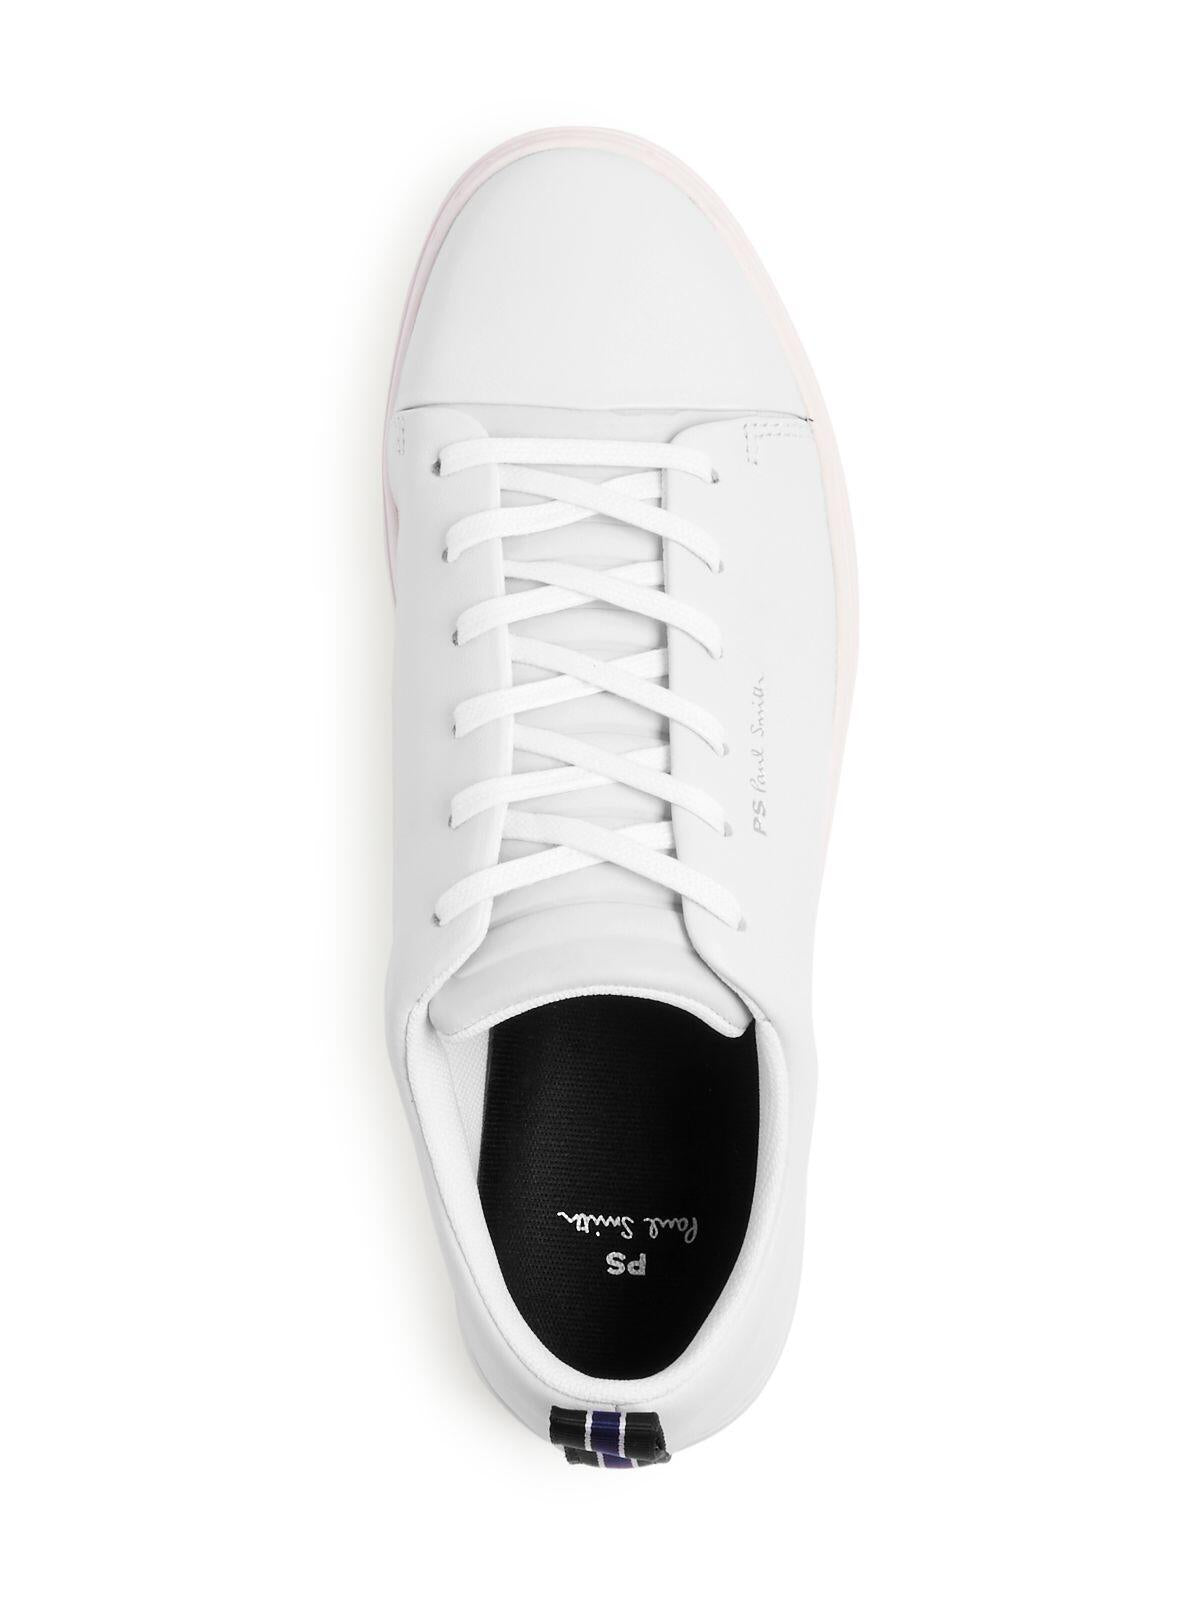 PAUL SMITH Mens White Tennis-Style Back Pull-Tab Padded Lee Round Toe Platform Lace-Up Leather Sneakers Shoes 11